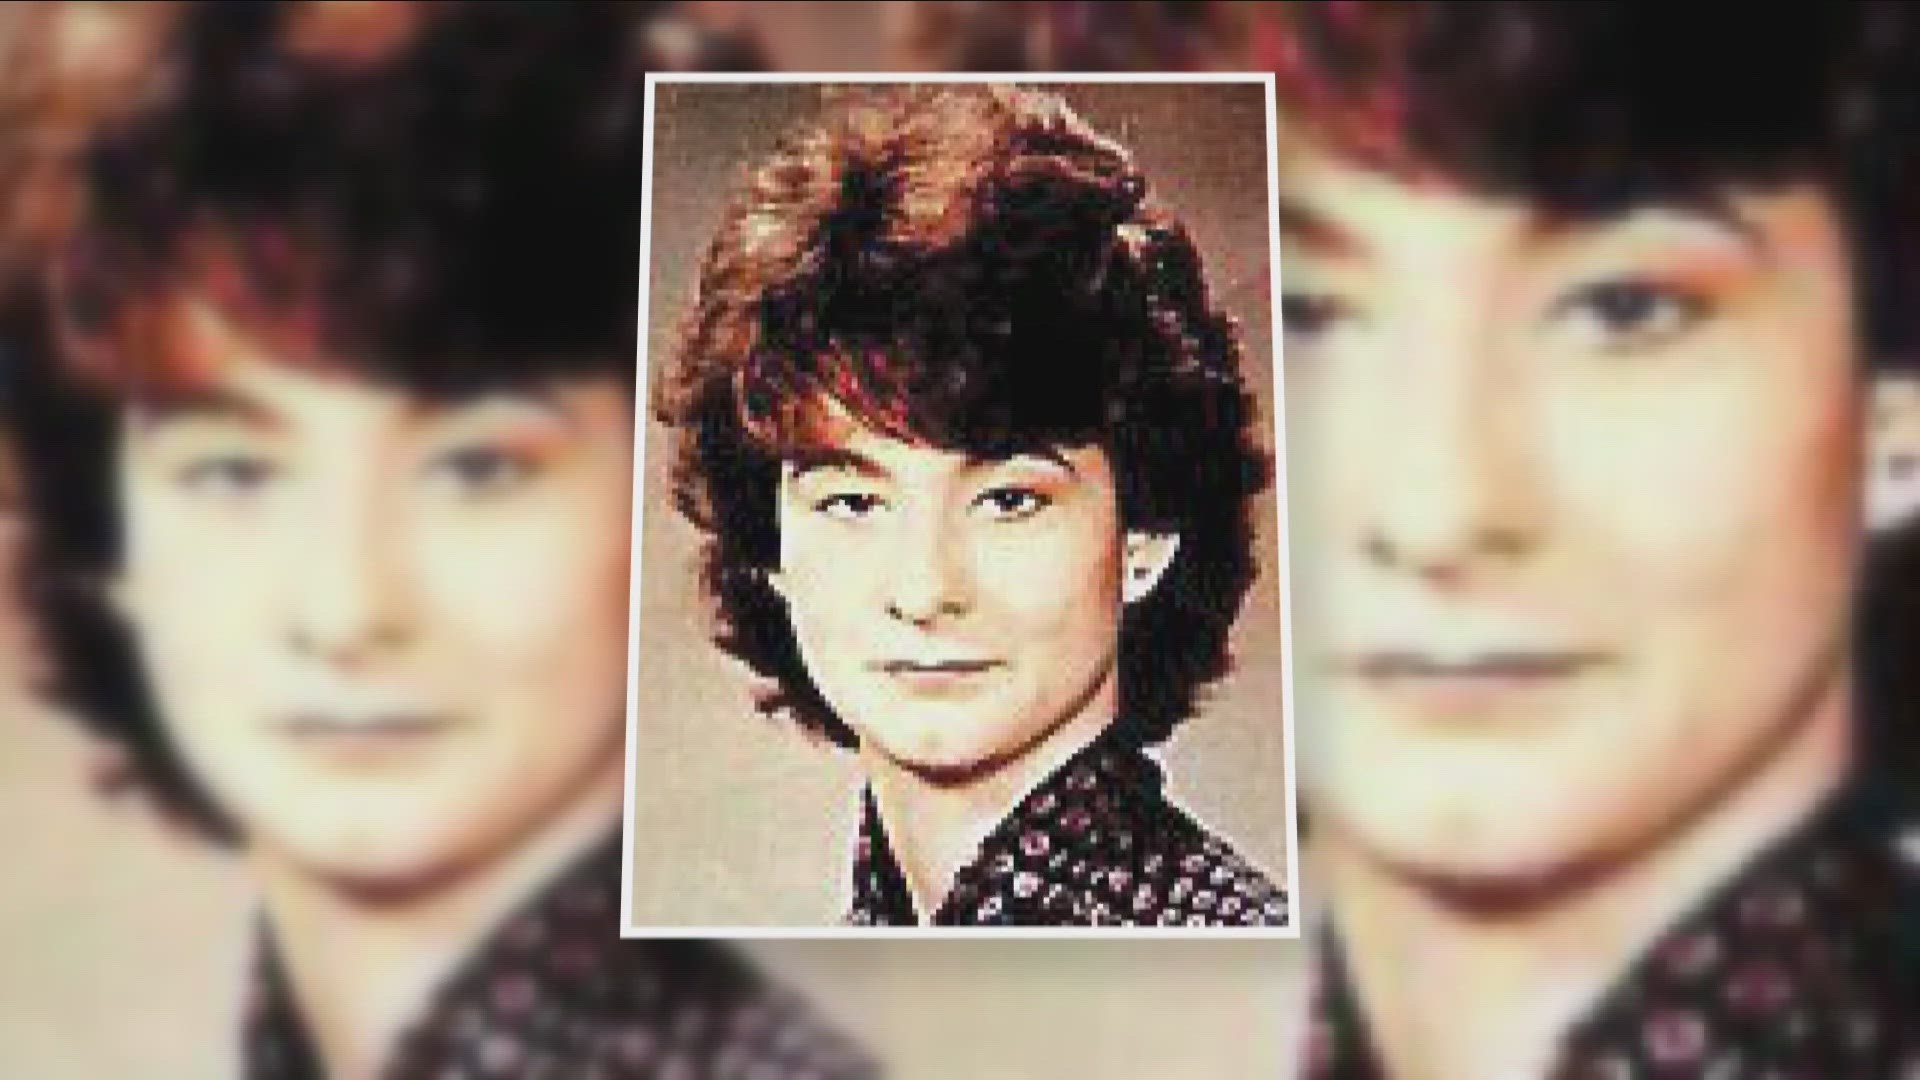 Leichia Reilly, 21, disappeared on January 31, 1985.